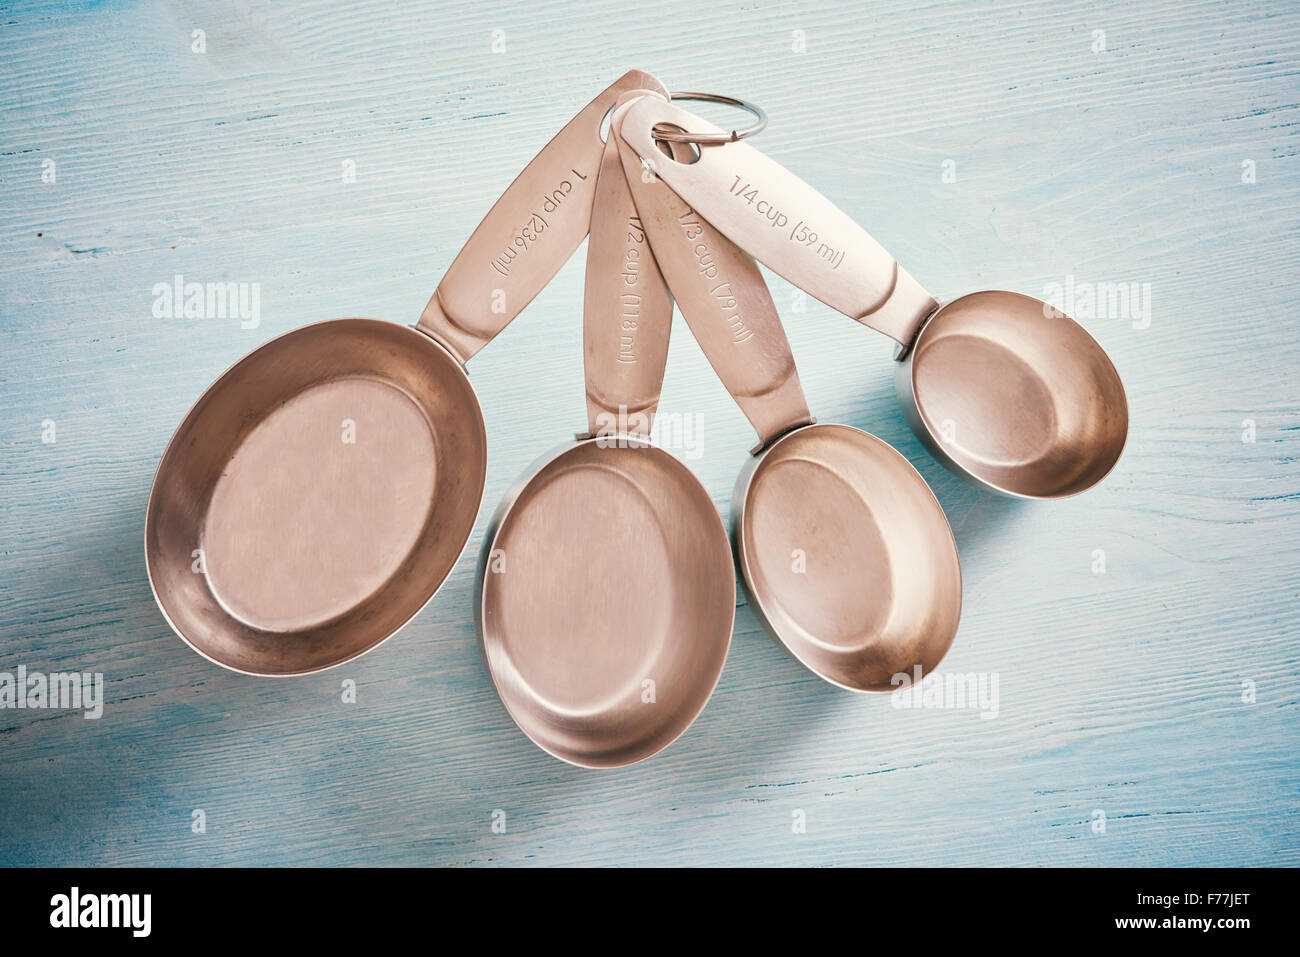 https://c8.alamy.com/comp/F77JET/measuring-spoons-cups-on-blue-wooden-table-F77JET.jpg